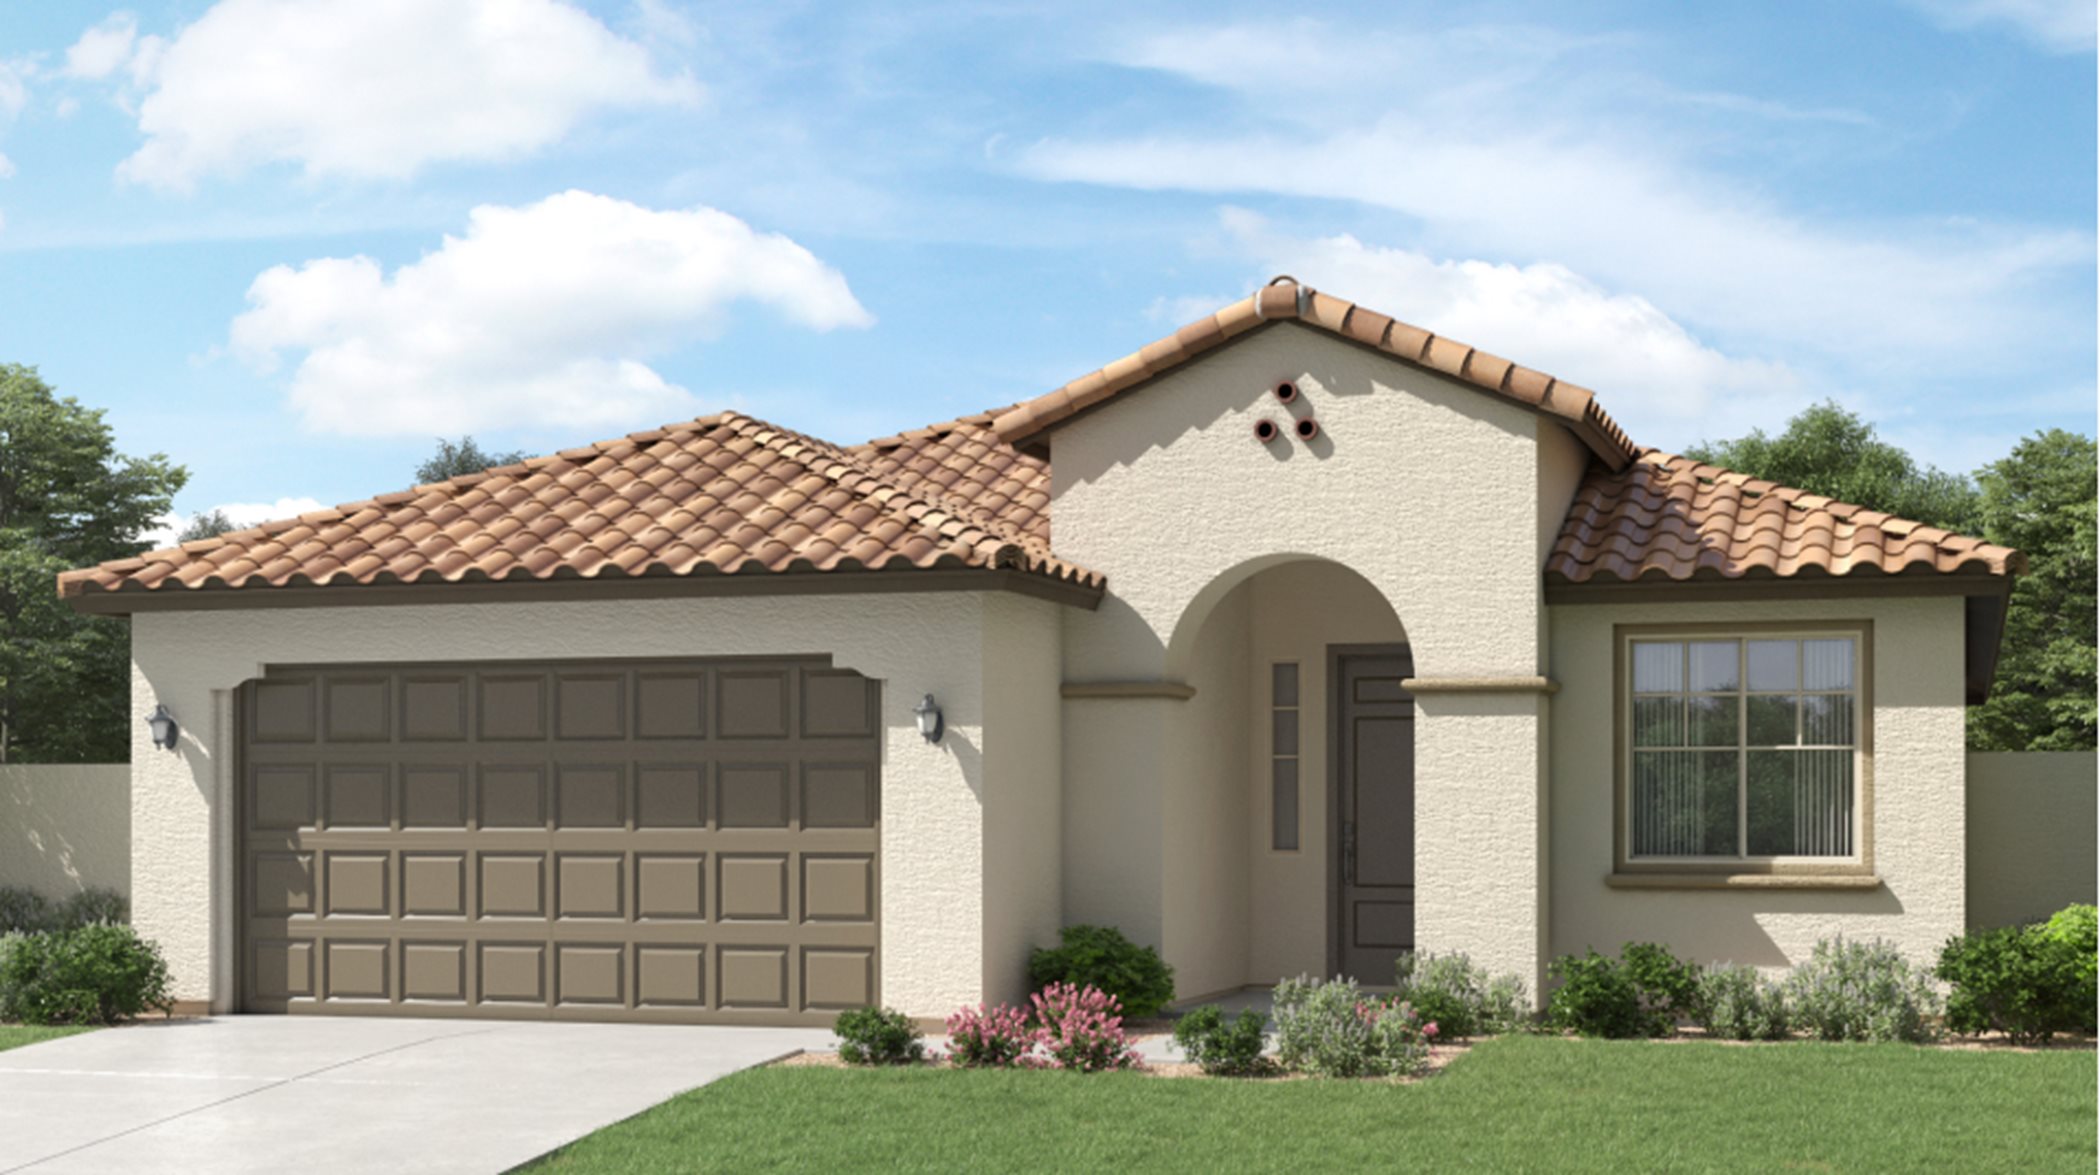 Spanish Colonial home rendering image